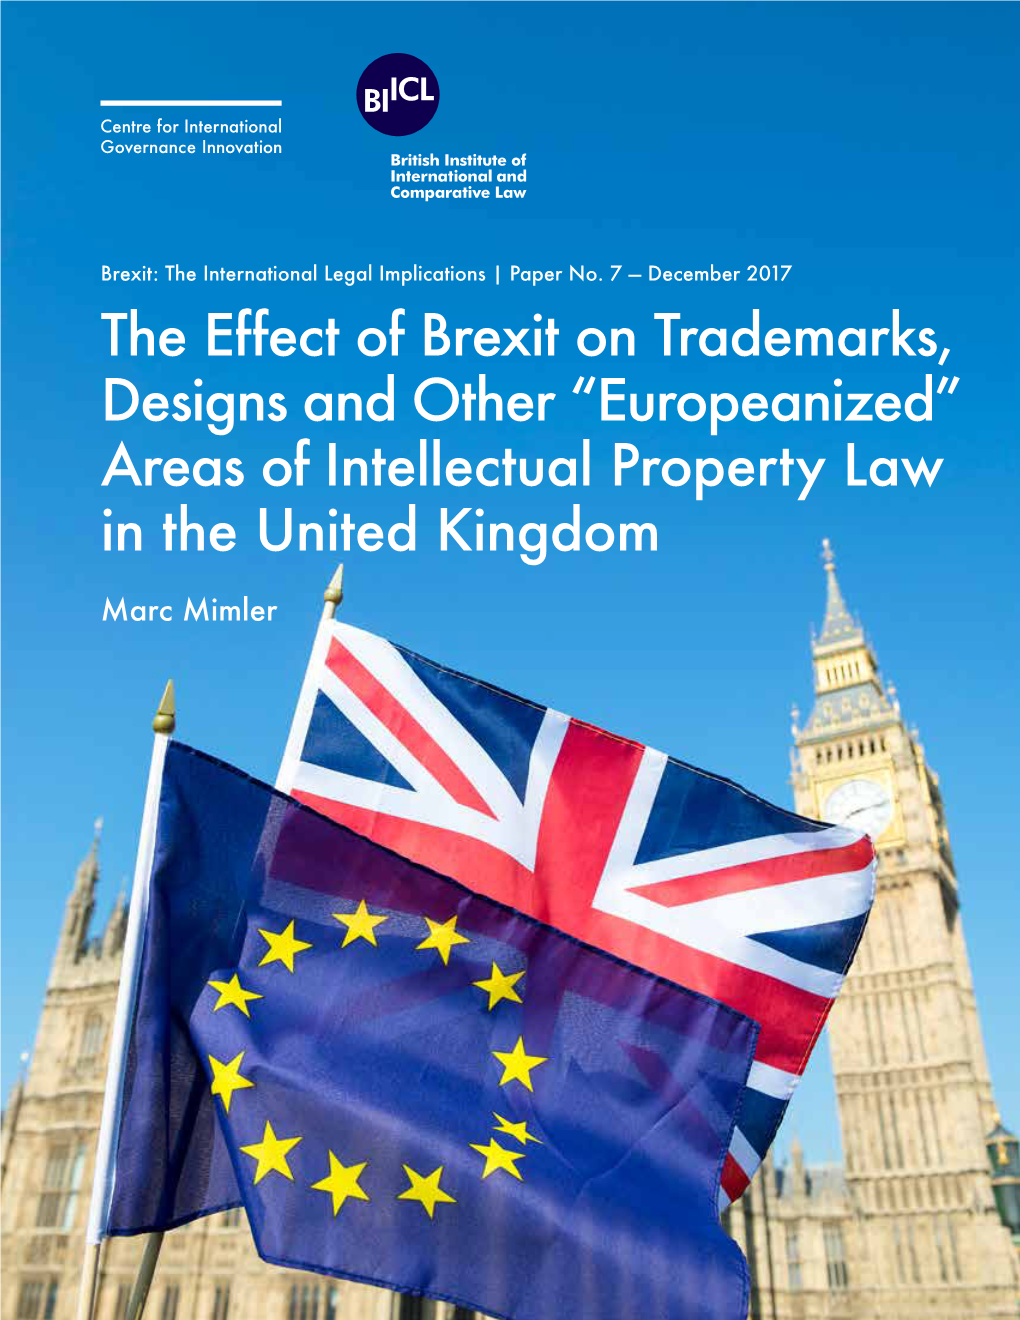 The Effect of Brexit on Trademarks, Designs and Other “Europeanized” Areas of Intellectual Property Law in the United Kingdom